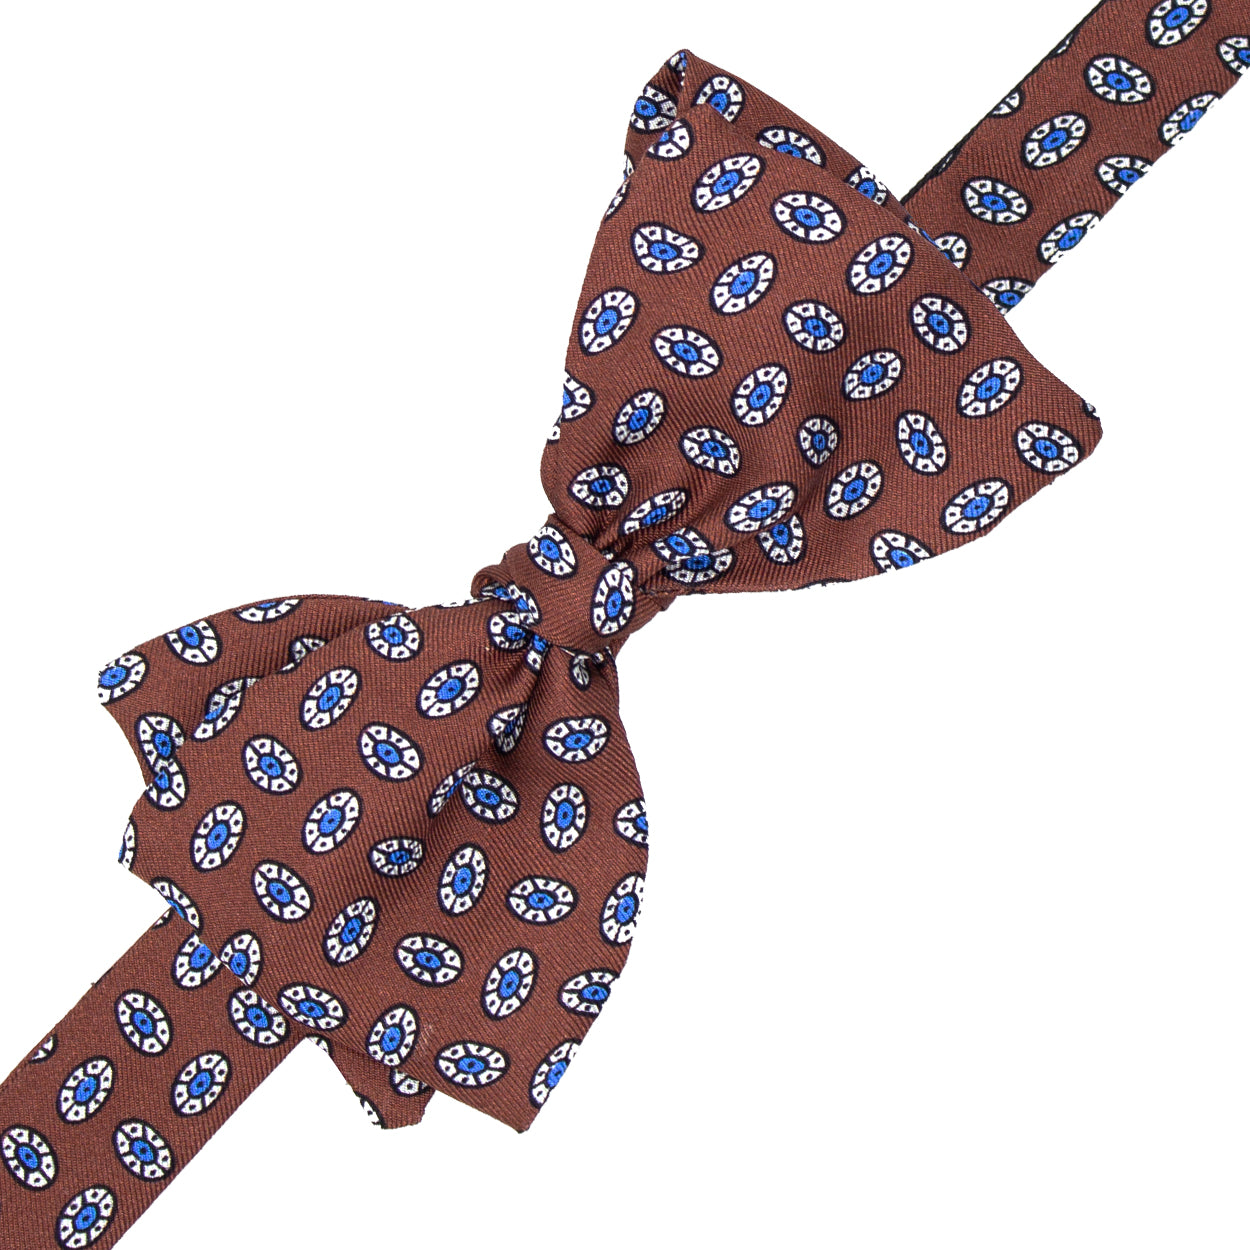 Brown bow tie with white, light blue and black dots pattern